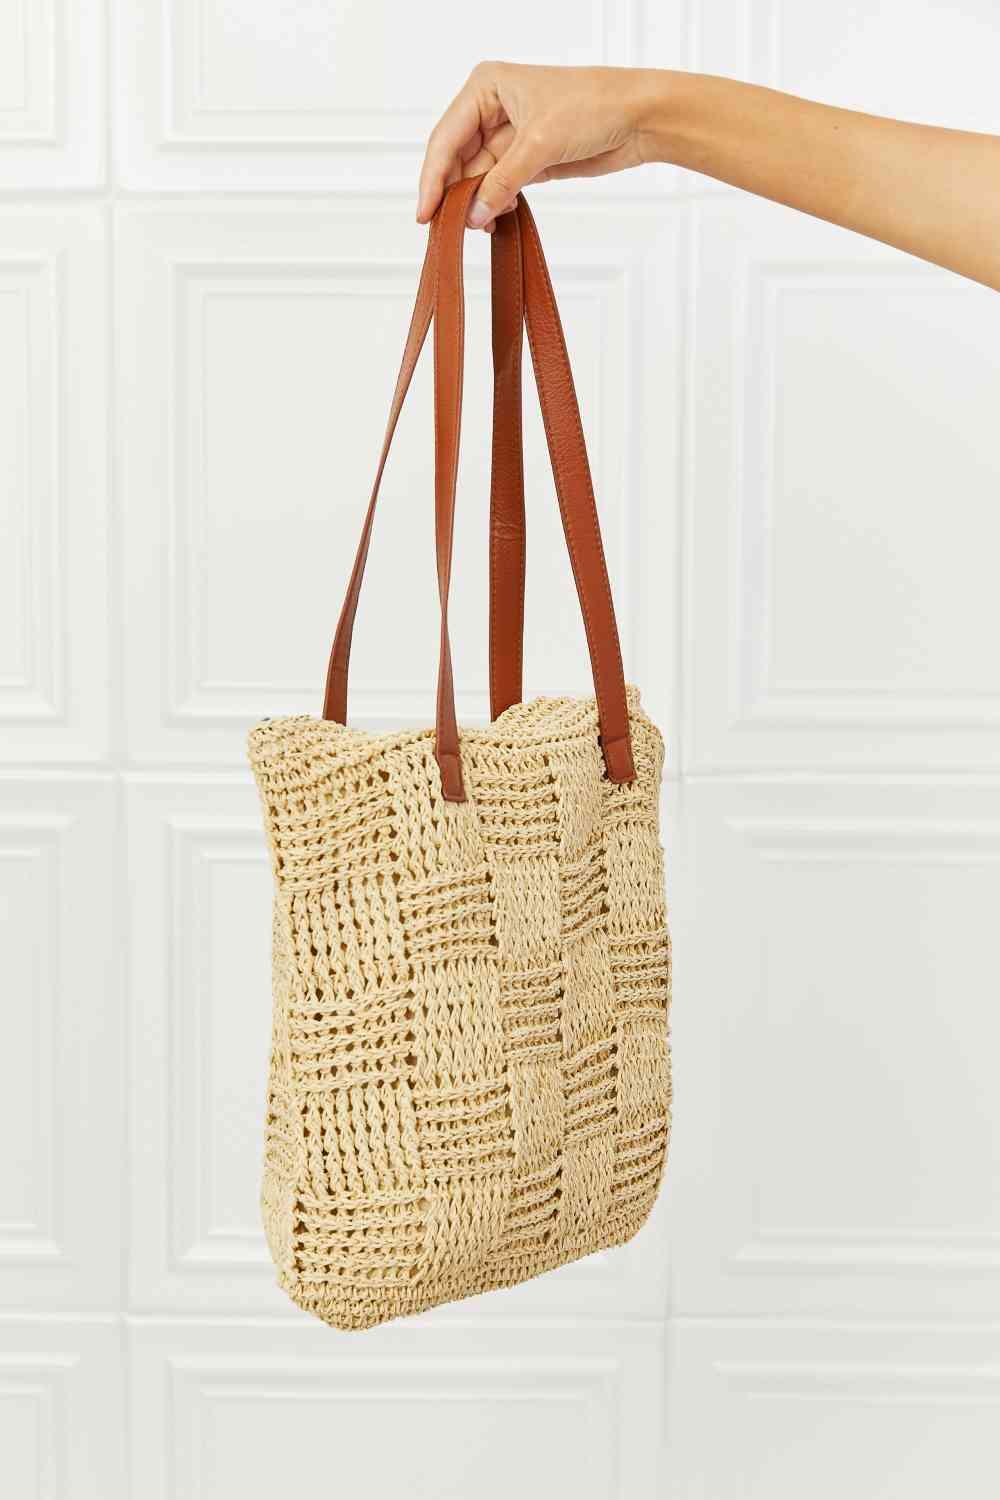 Fame Picnic Date Straw Tote Bag - Wildflower Hippies